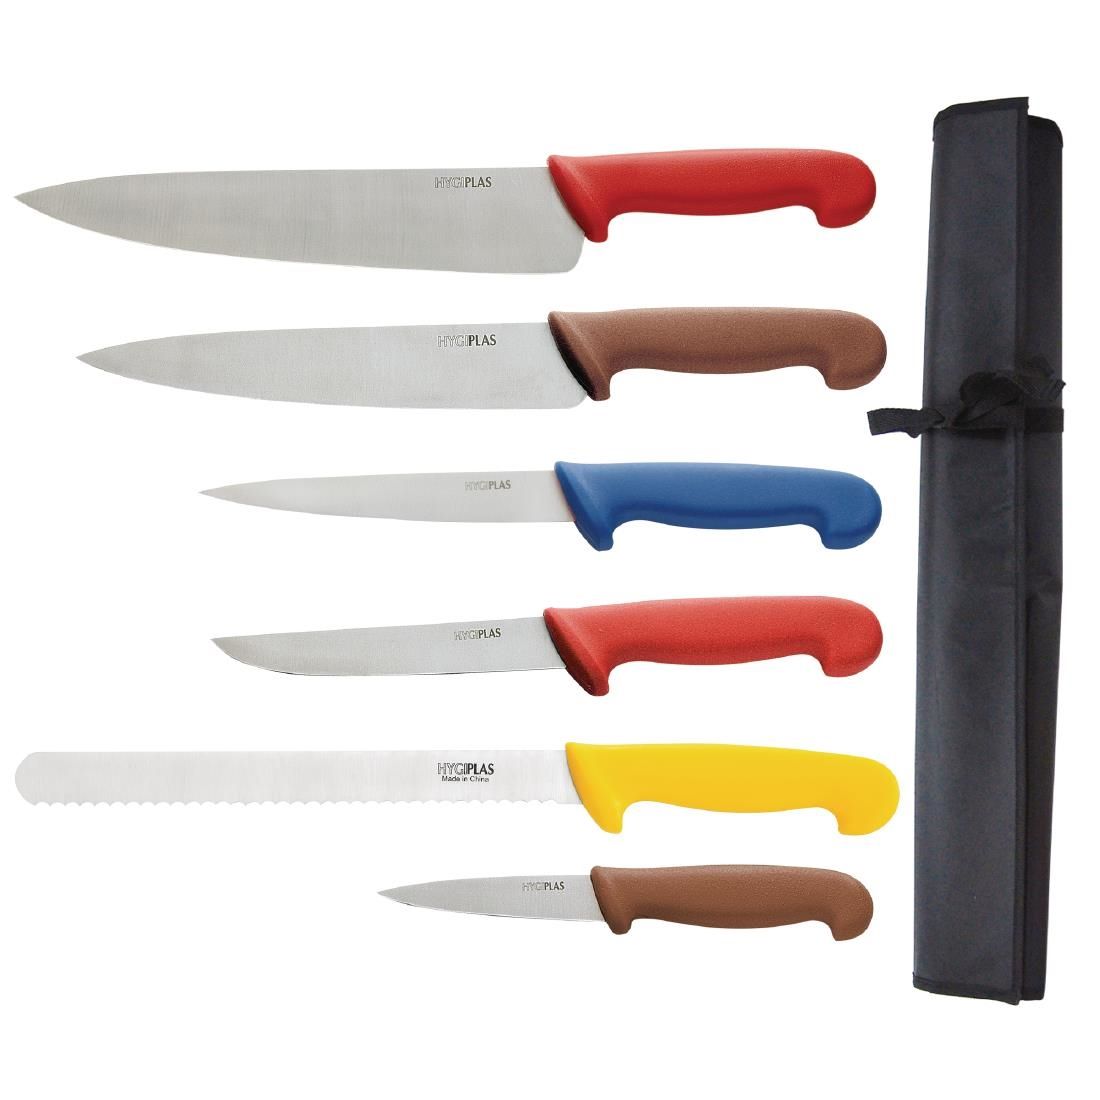 S088 Hygiplas Colour Coded Chefs Knife Set with Wallet